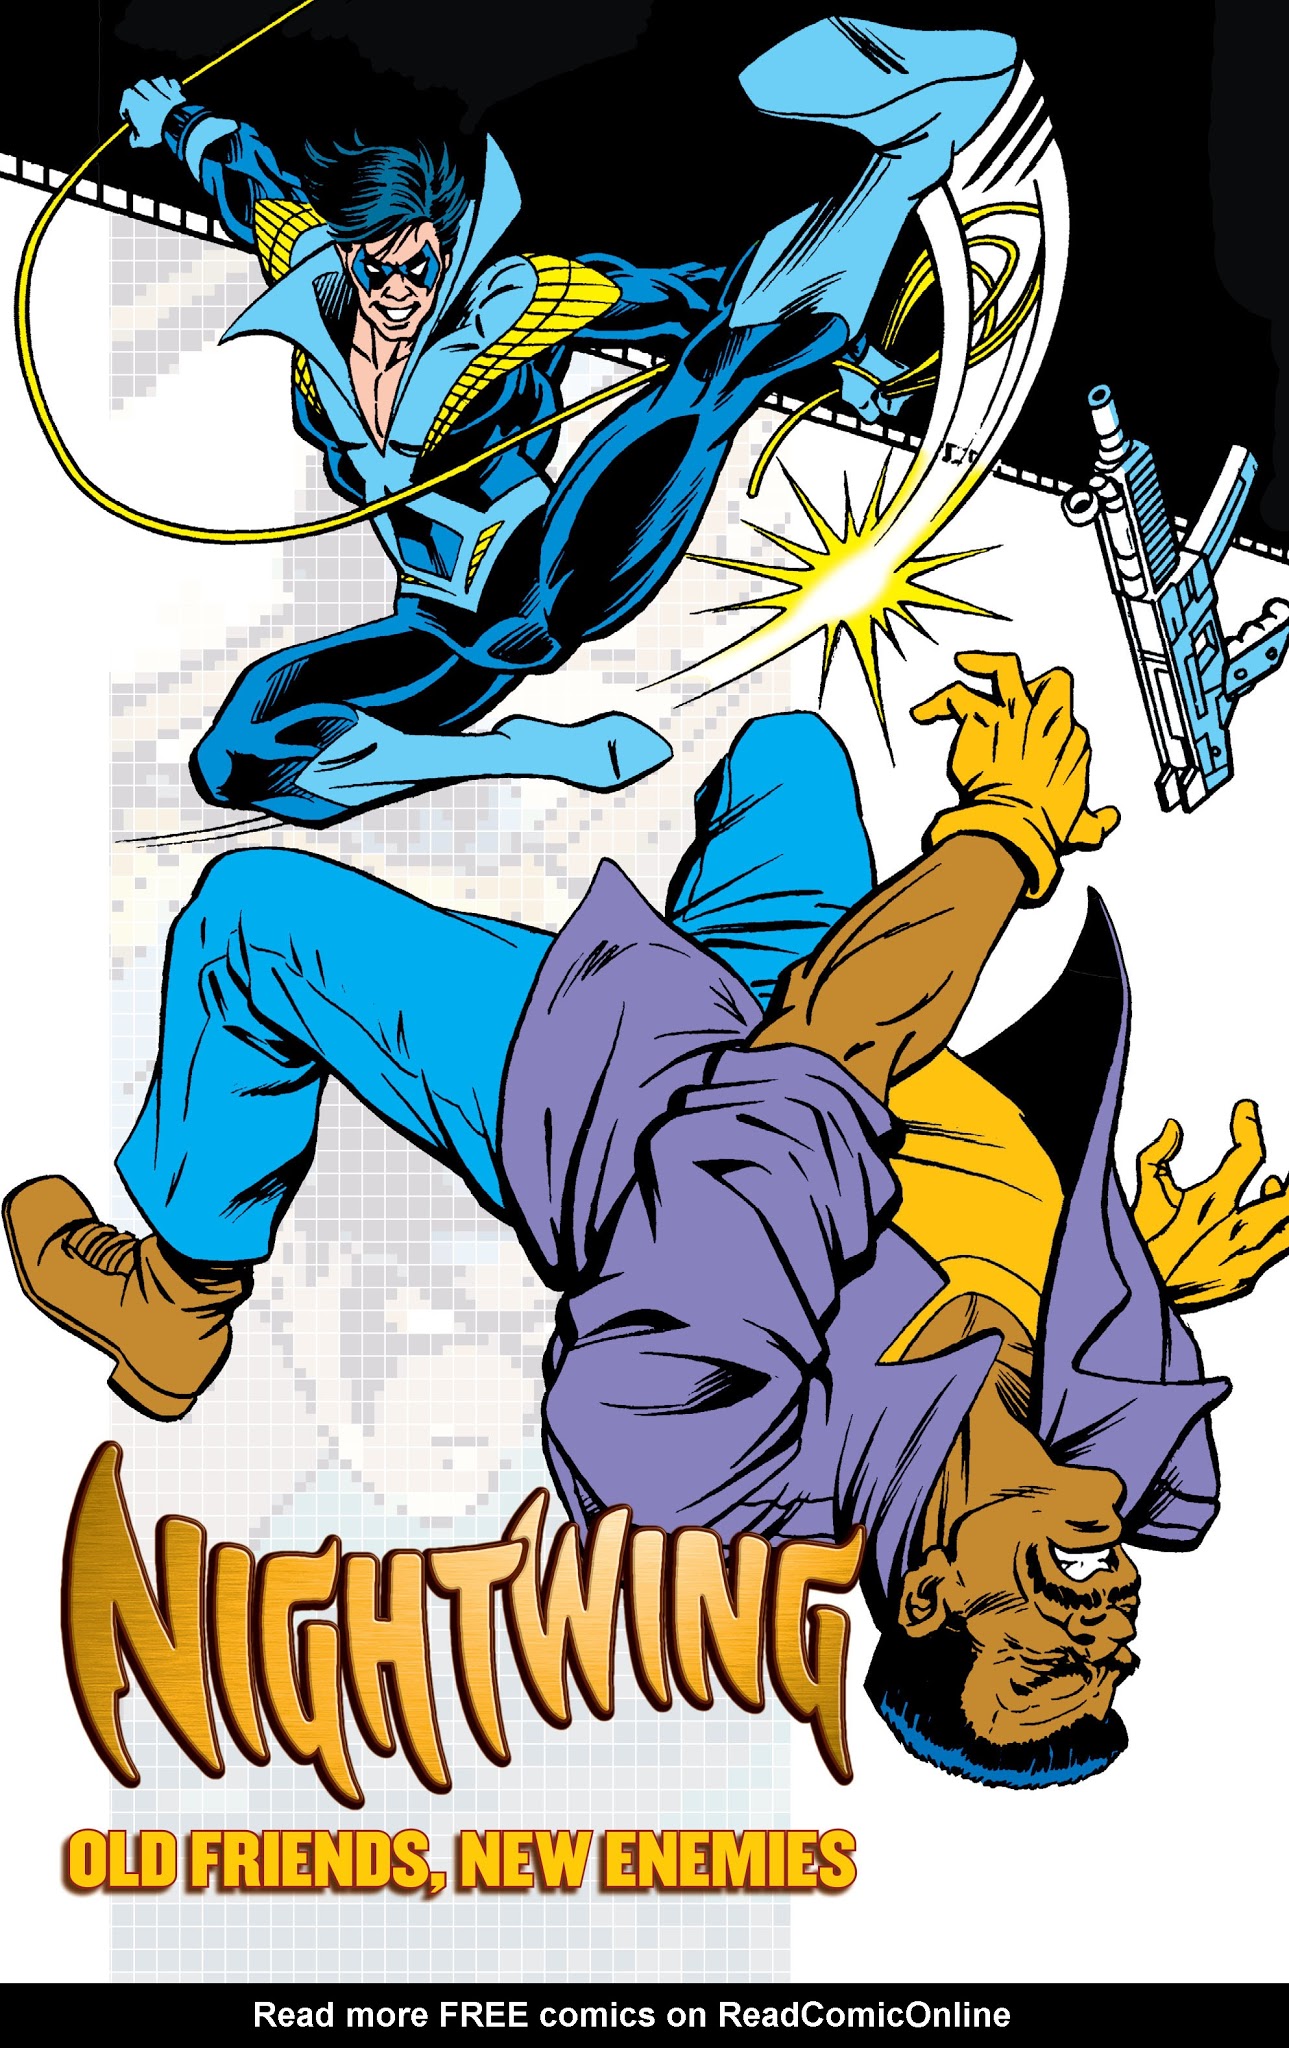 Read online Nightwing: Old Friends, New Enemies comic -  Issue # TPB - 3